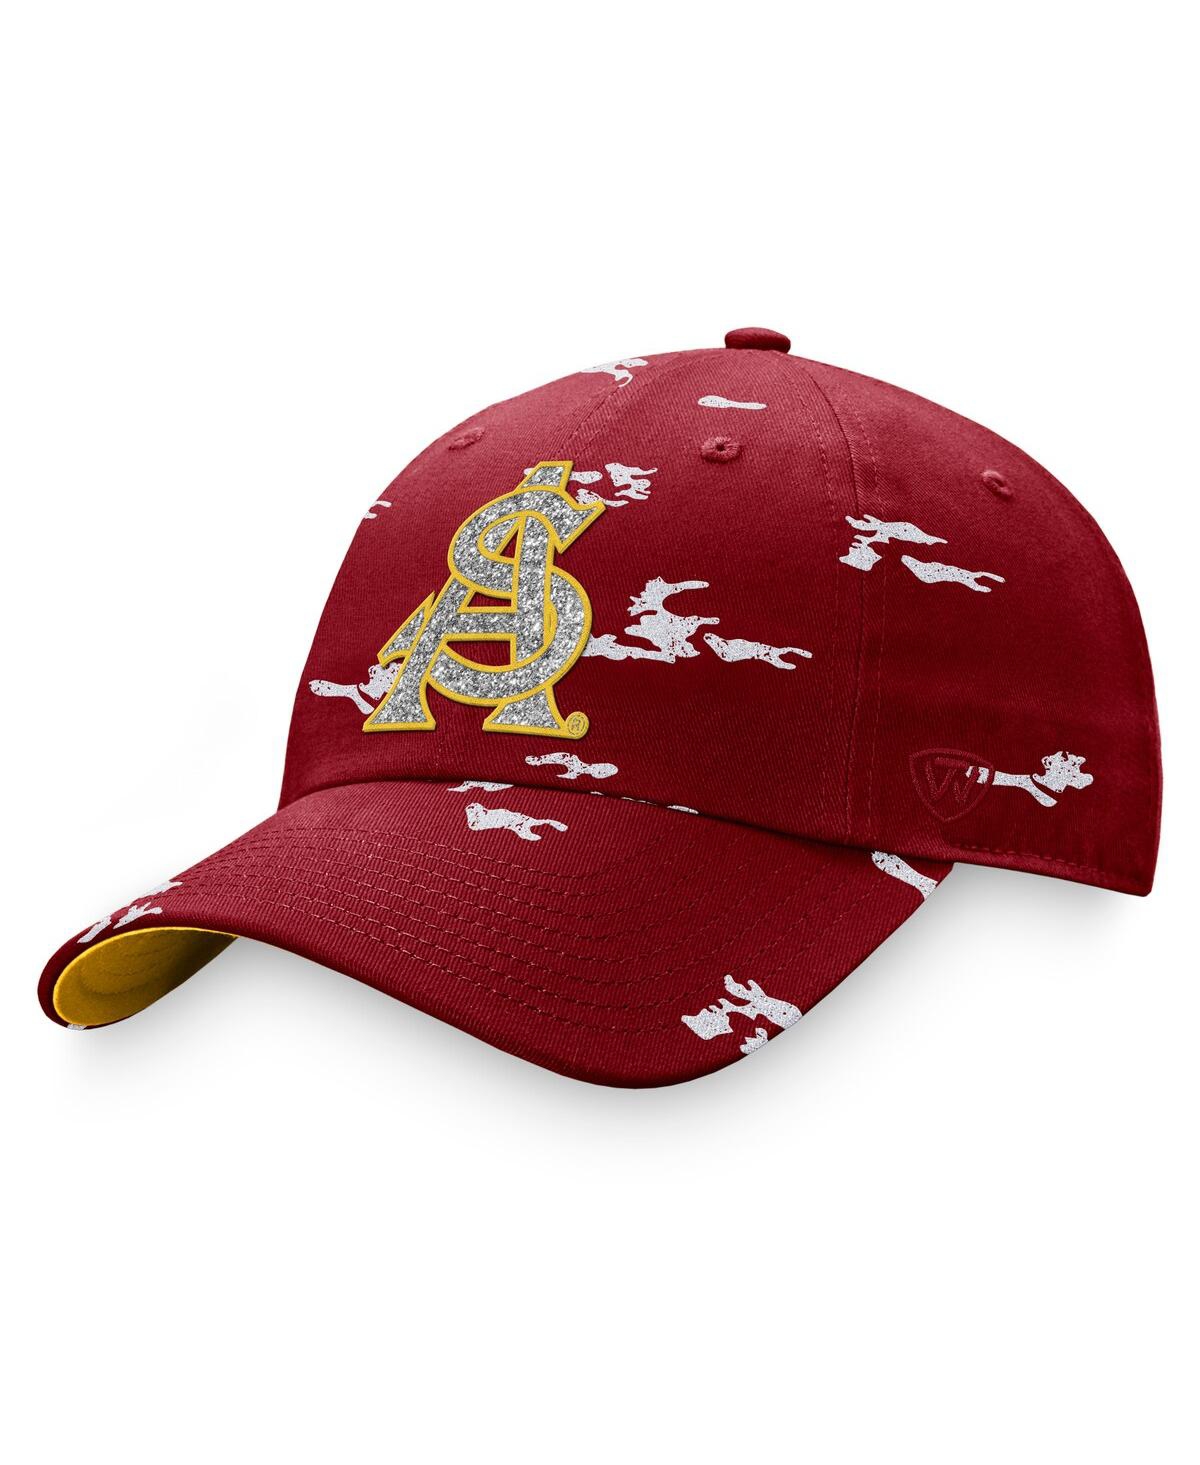 Women's Top of the World Maroon Arizona State Sun Devils Oht Military-Inspired Appreciation Betty Adjustable Hat - Maroon